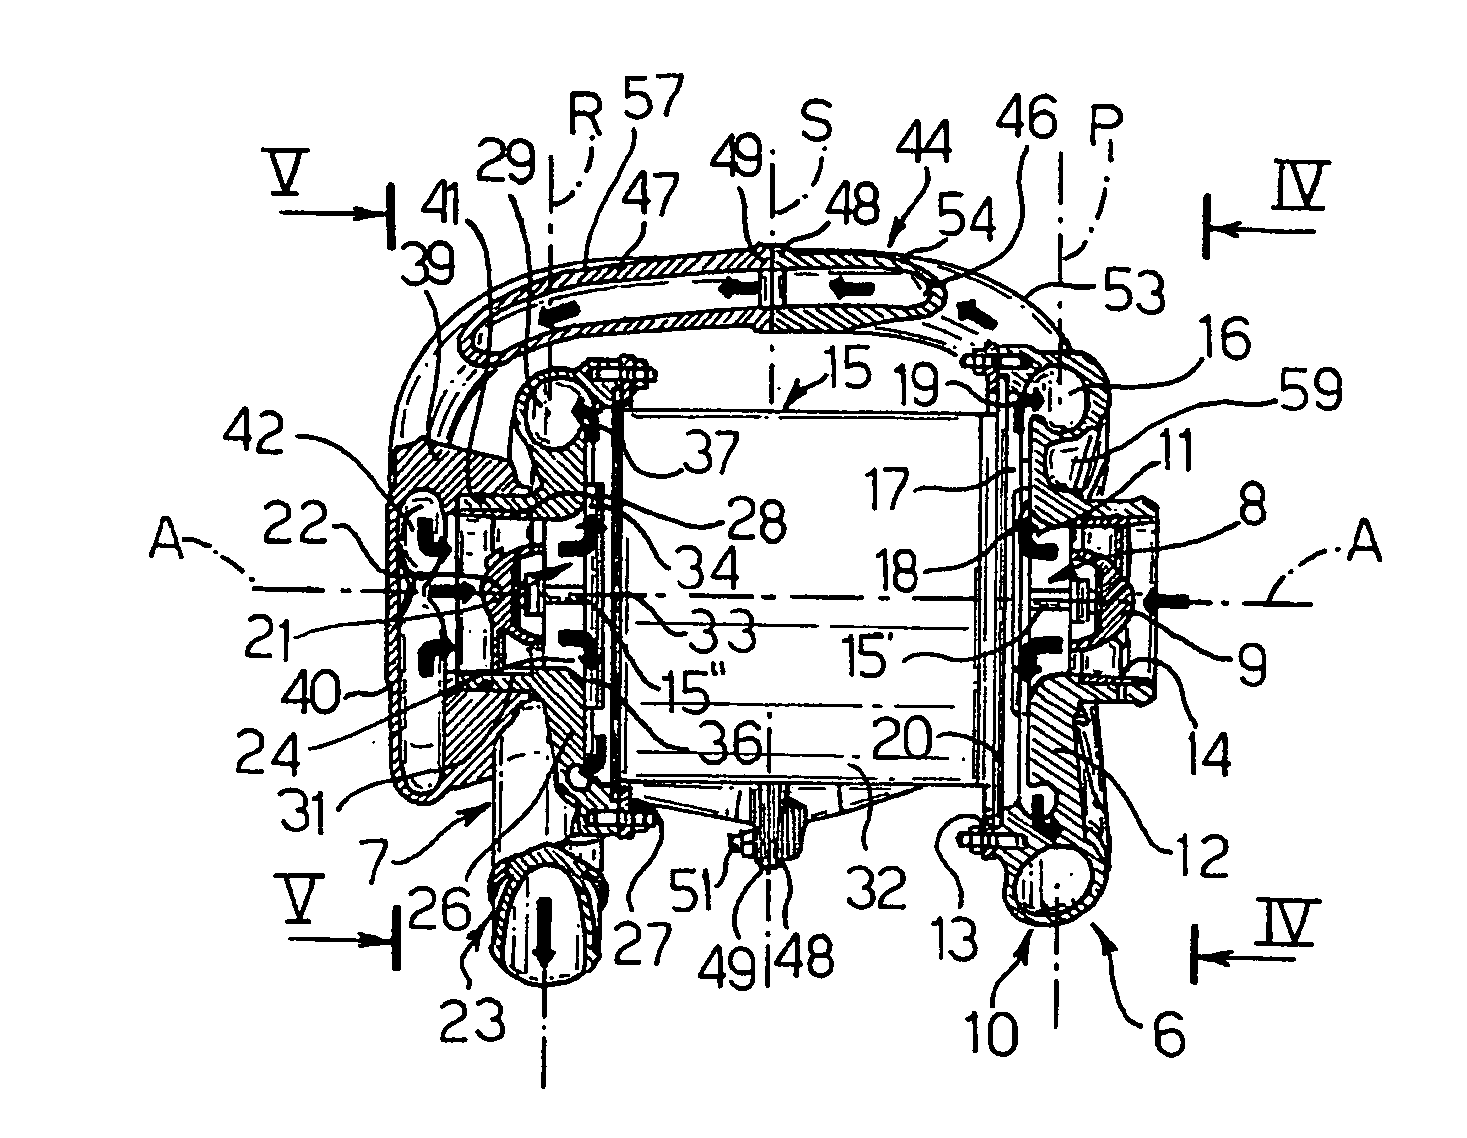 Multistage motor-compressor for the compression of a fluid